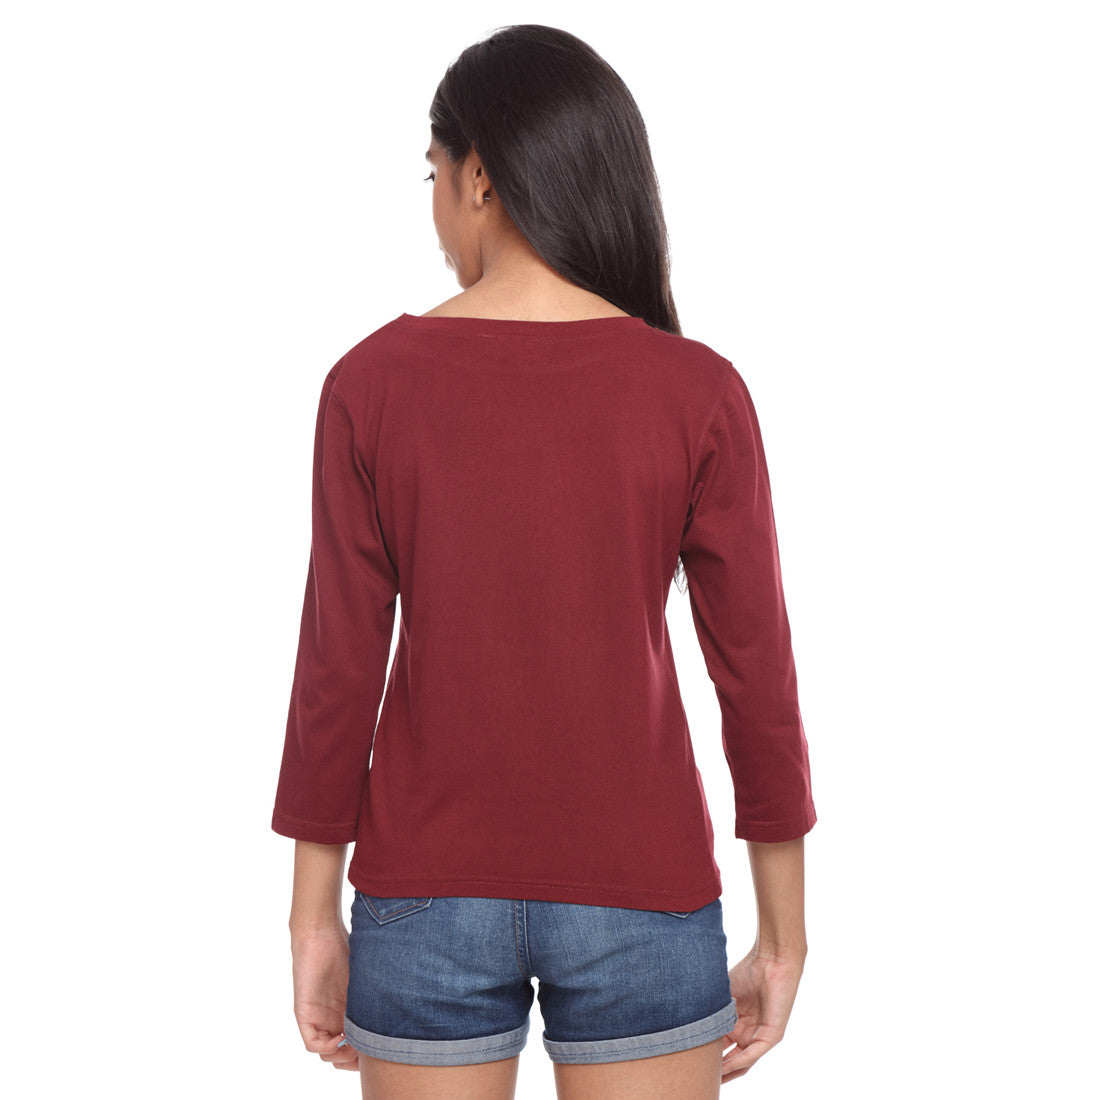 Maroon Long Tee Can't Do Without - GENZEE